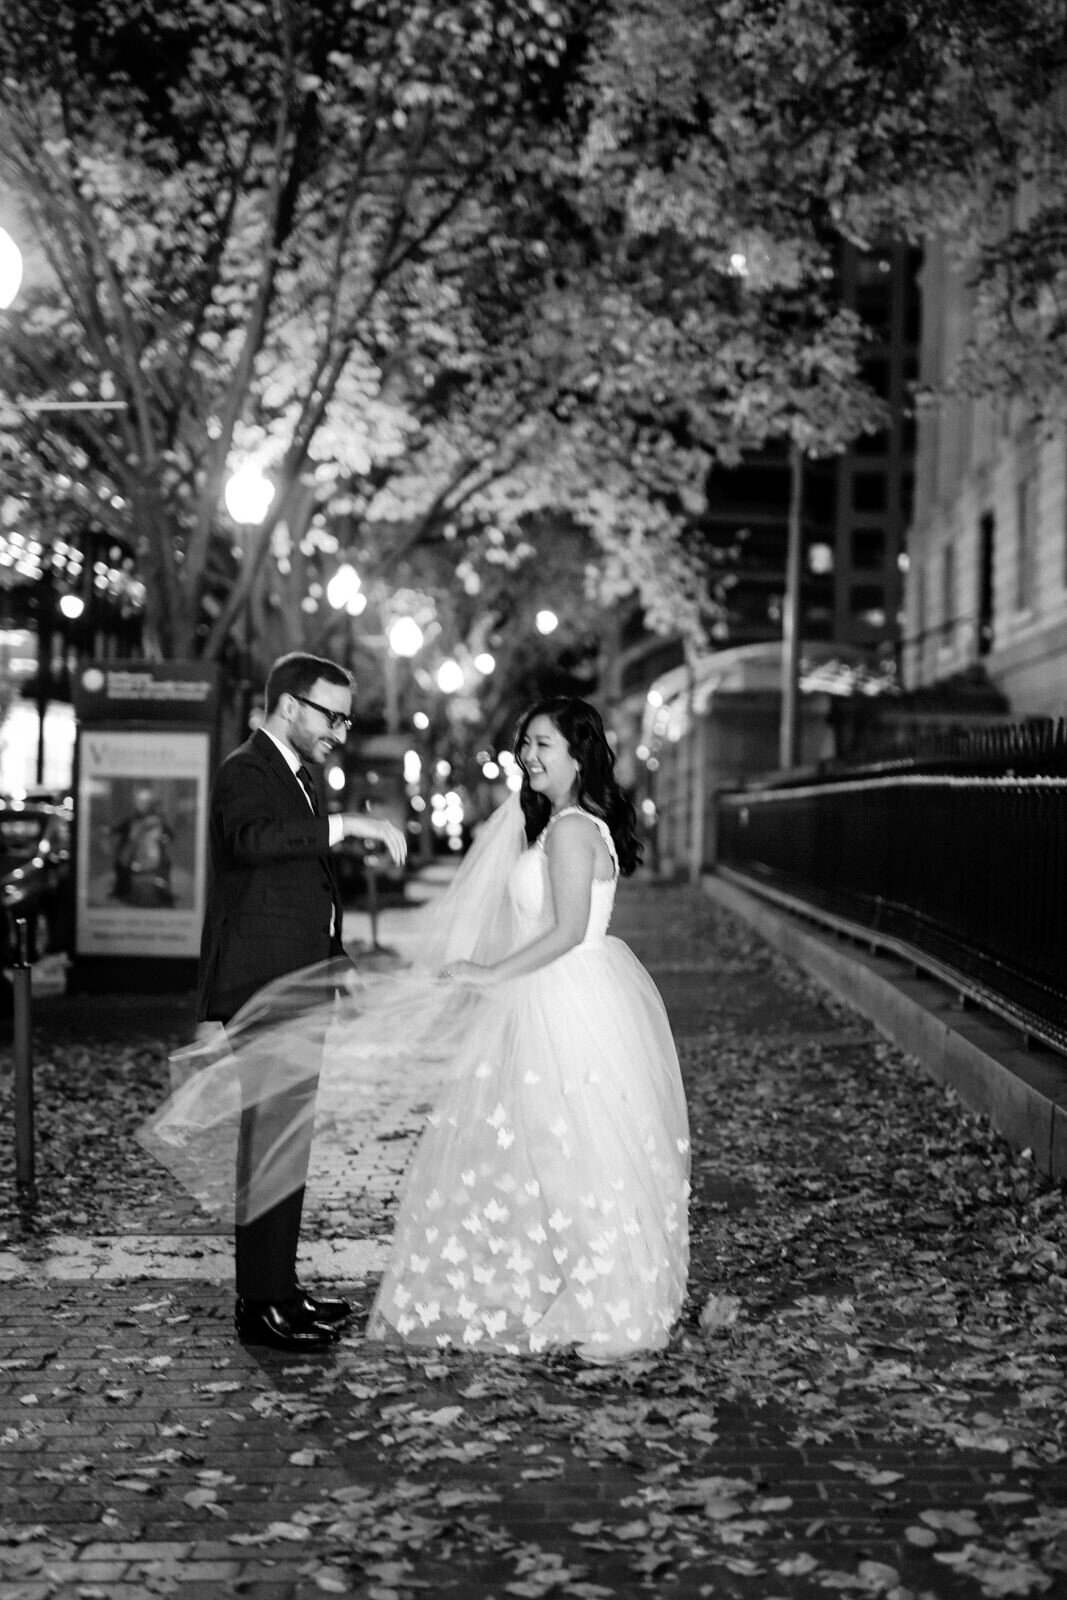 Creative Wedding Photography at The Riggs Hotel in Washington DC 29